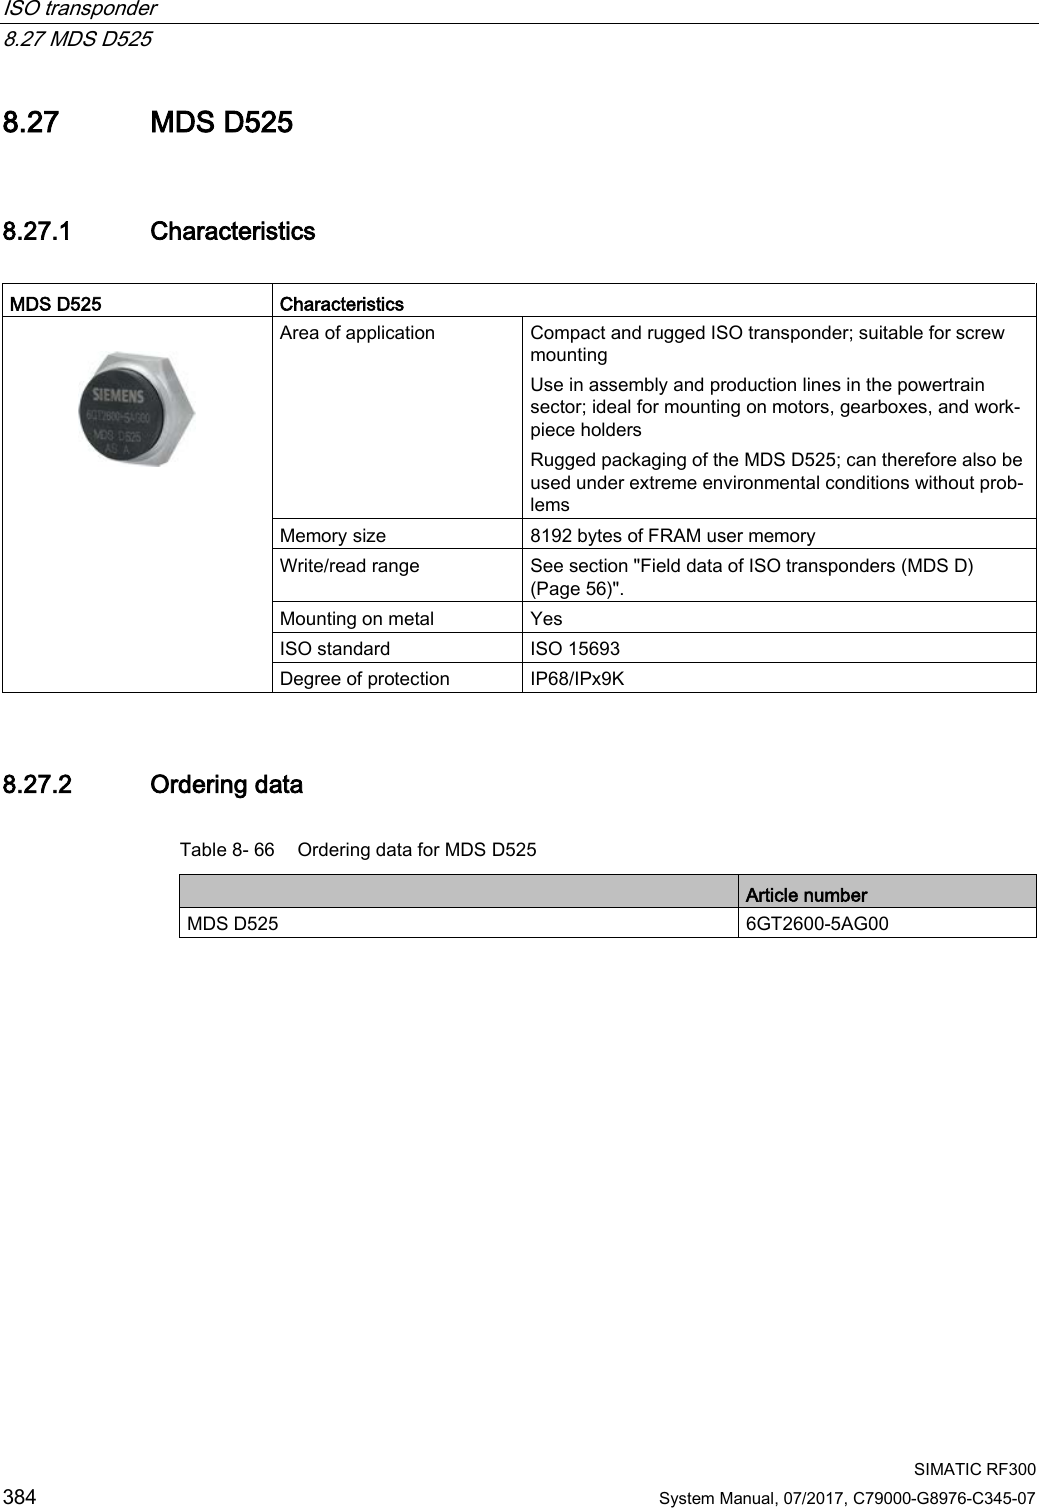 ISO transponder   8.27 MDS D525  SIMATIC RF300 384 System Manual, 07/2017, C79000-G8976-C345-07 8.27 MDS D525 8.27.1 Characteristics  MDS D525 Characteristics   Area of application Compact and rugged ISO transponder; suitable for screw mounting Use in assembly and production lines in the powertrain sector; ideal for mounting on motors, gearboxes, and work-piece holders Rugged packaging of the MDS D525; can therefore also be used under extreme environmental conditions without prob-lems Memory size 8192 bytes of FRAM user memory Write/read range See section &quot;Field data of ISO transponders (MDS D) (Page 56)&quot;. Mounting on metal Yes ISO standard ISO 15693 Degree of protection IP68/IPx9K 8.27.2 Ordering data Table 8- 66 Ordering data for MDS D525  Article number MDS D525 6GT2600-5AG00 